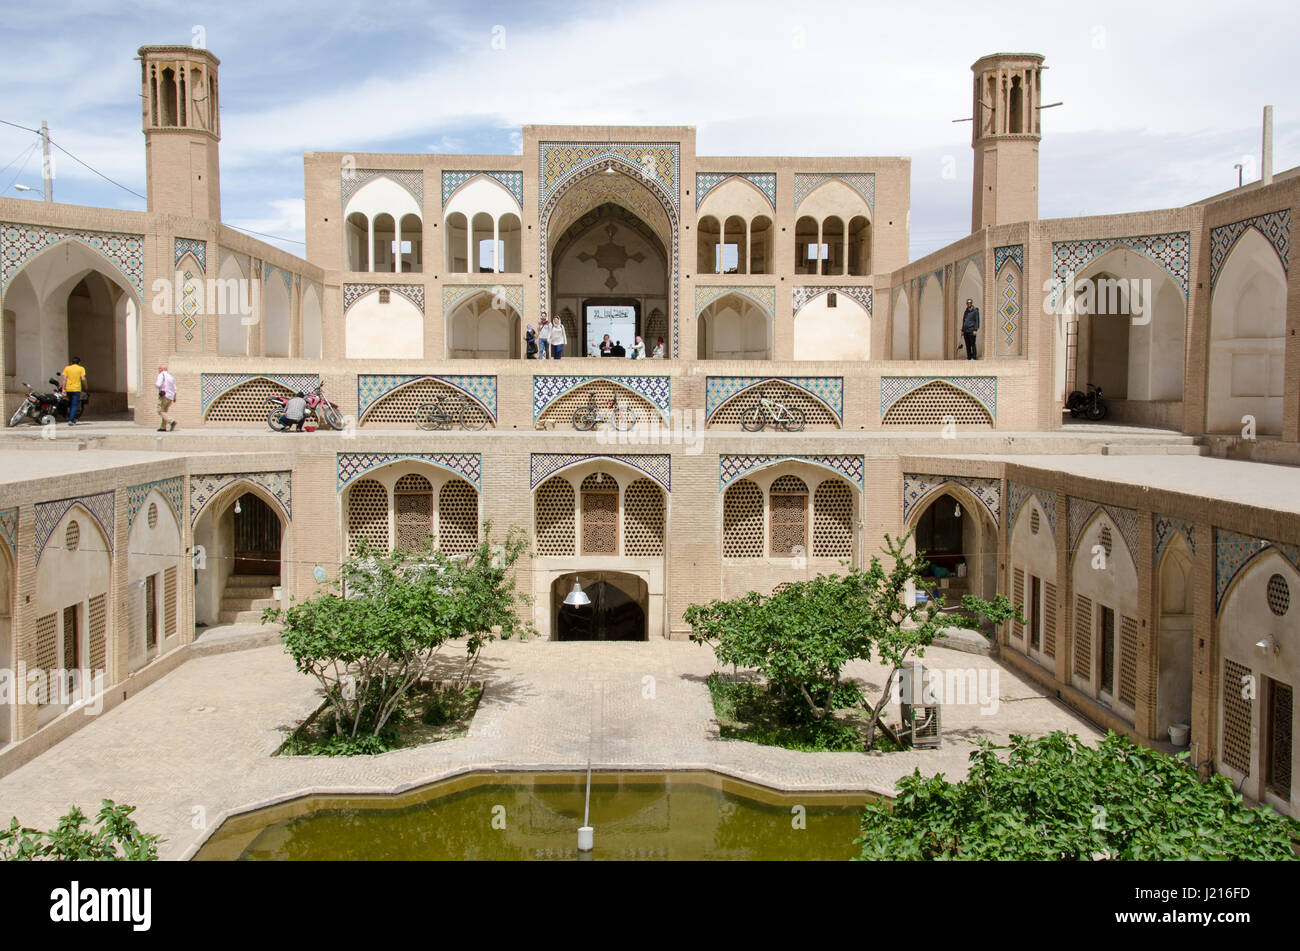 Agha Bozorg historical mosque and theological school in Kashan, Iran was built in late 18th century by master-mimar Ustad Haj Sa'ban-ali. Stock Photo